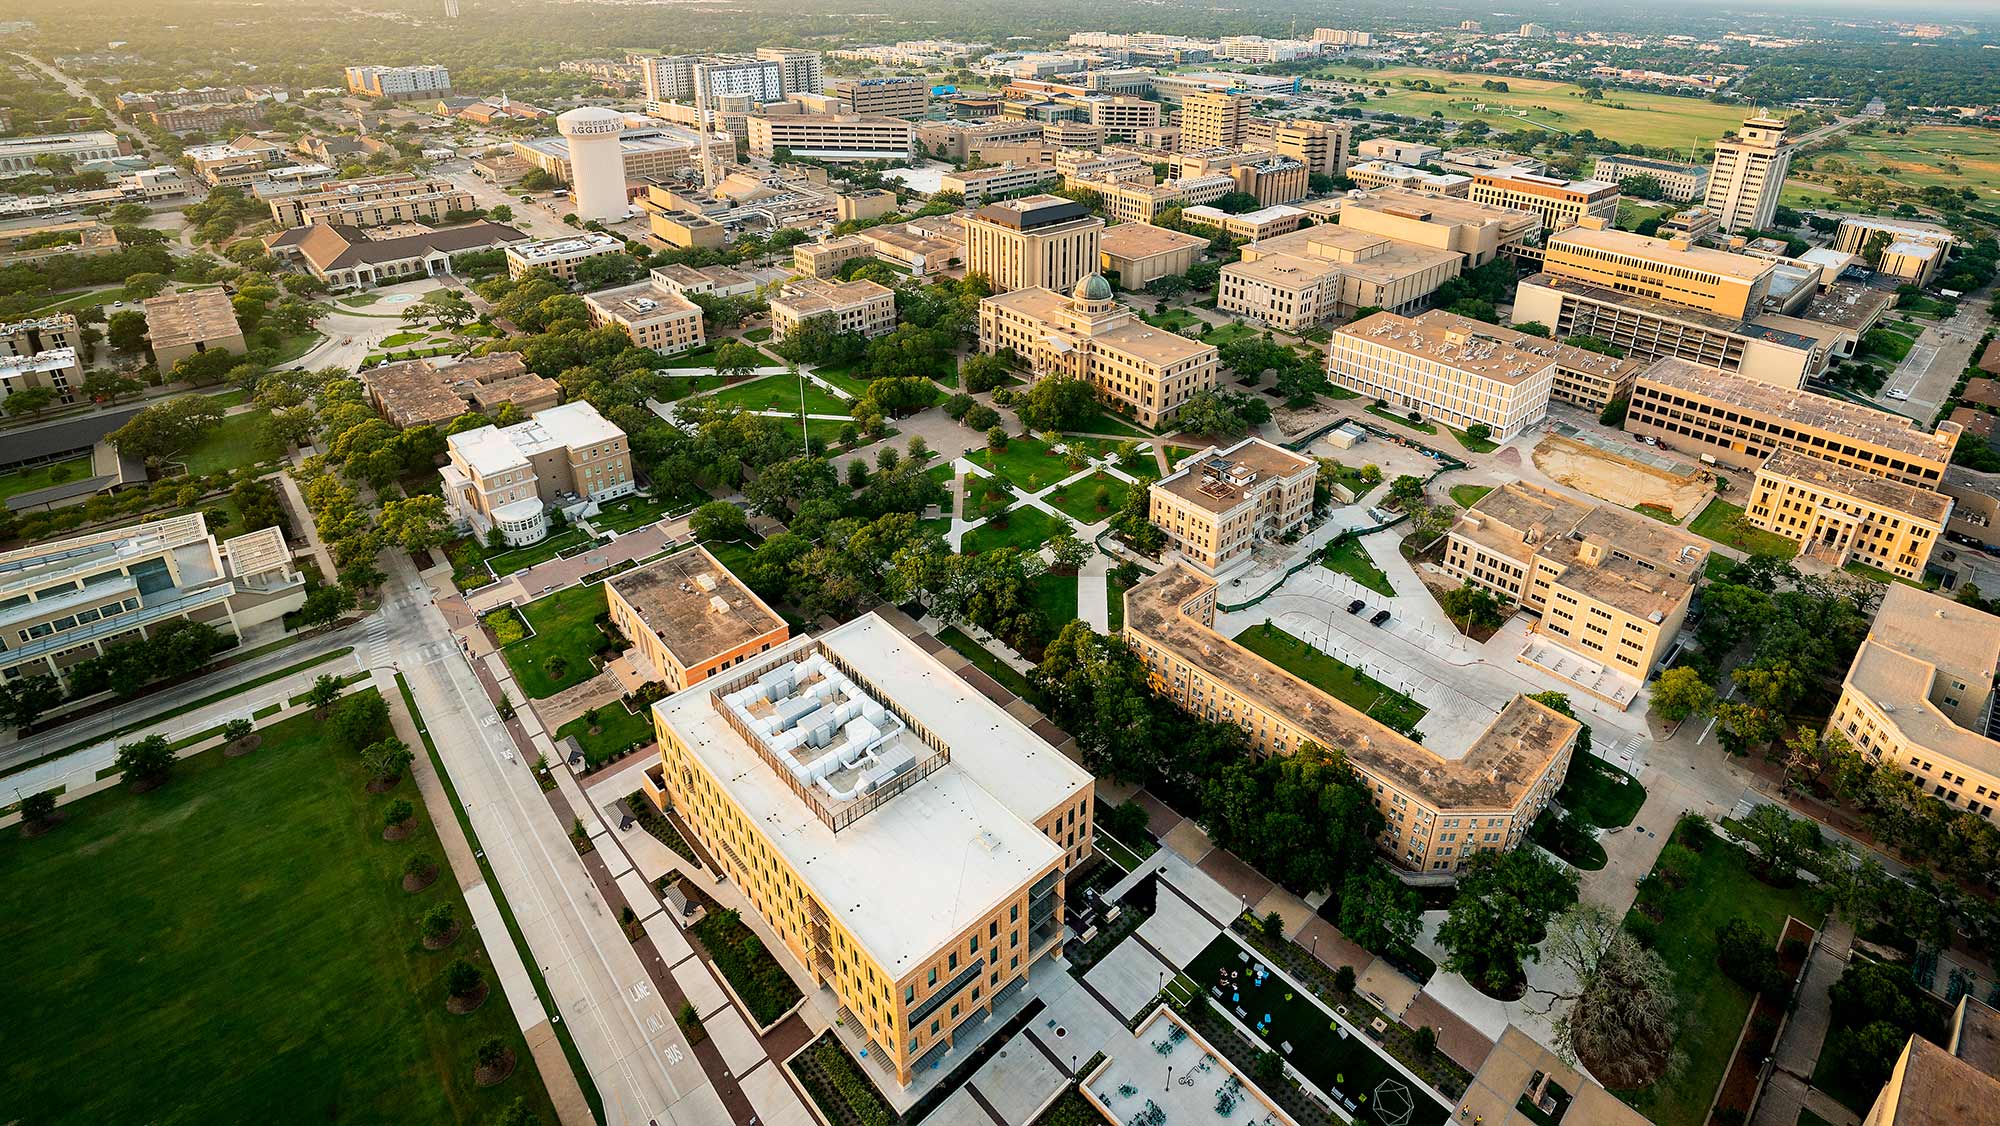 Buildings on the Texas A&M campus